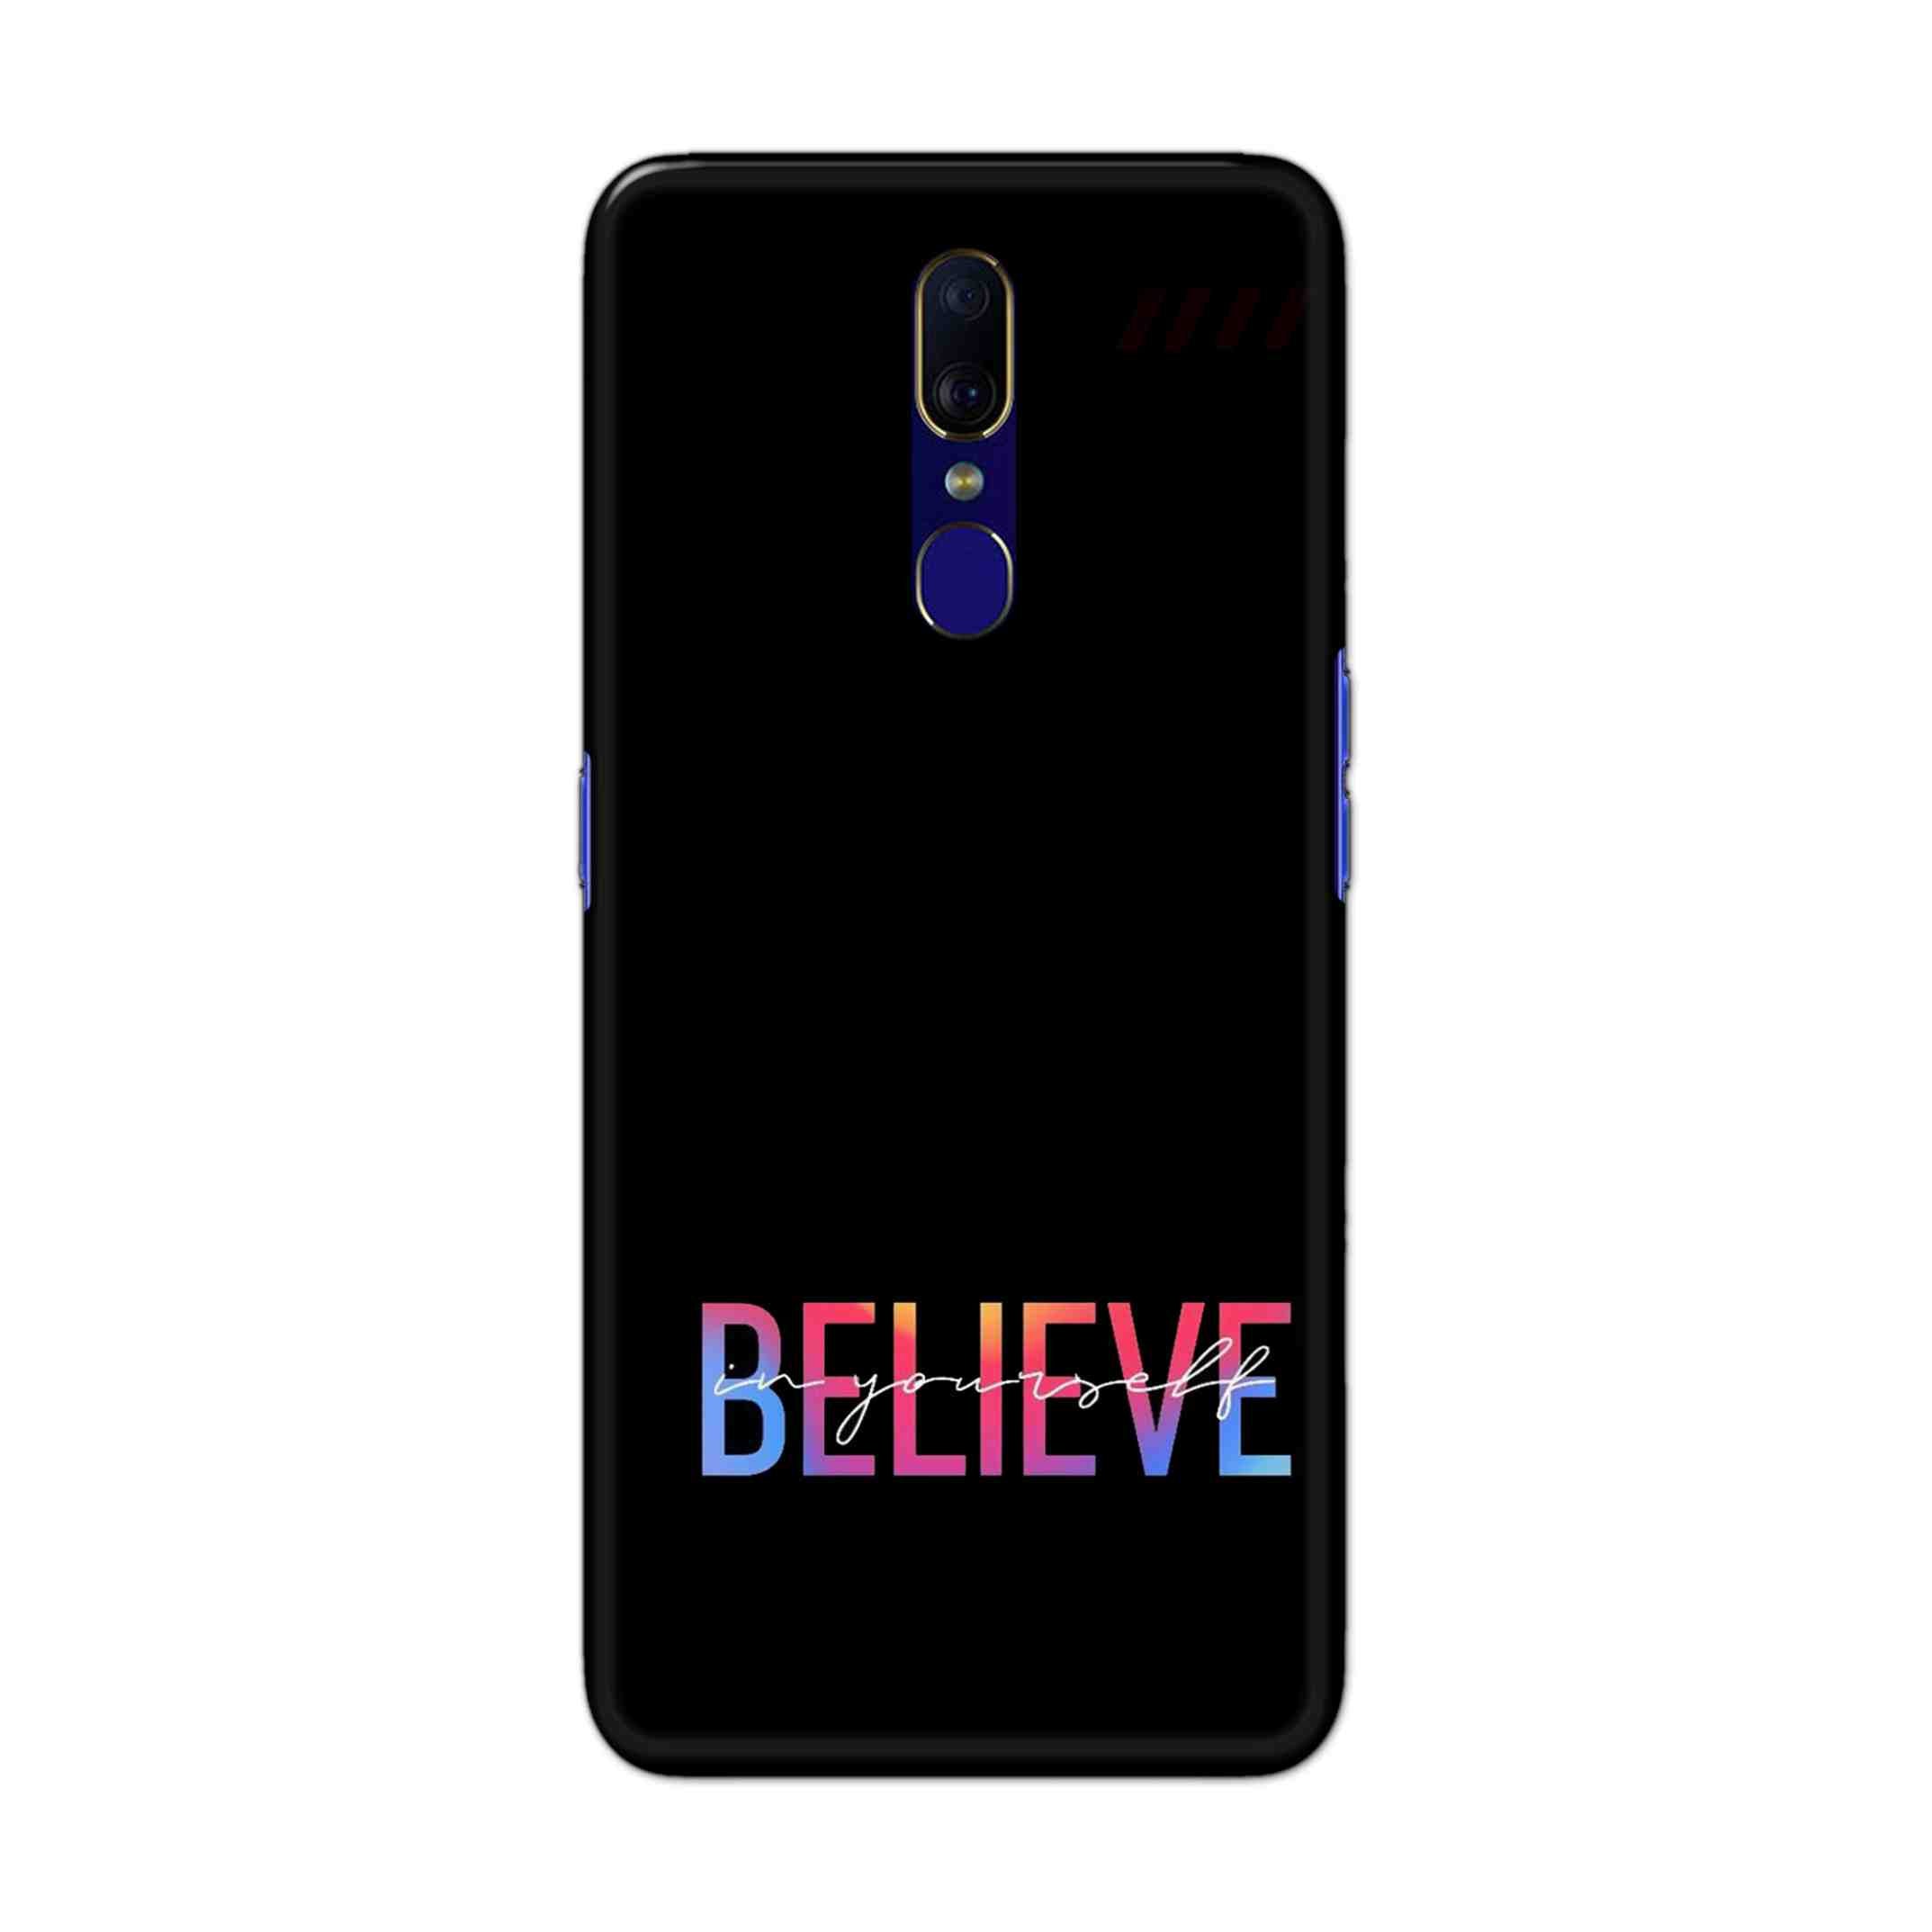 Buy Believe Hard Back Mobile Phone Case Cover For OPPO F11 Online